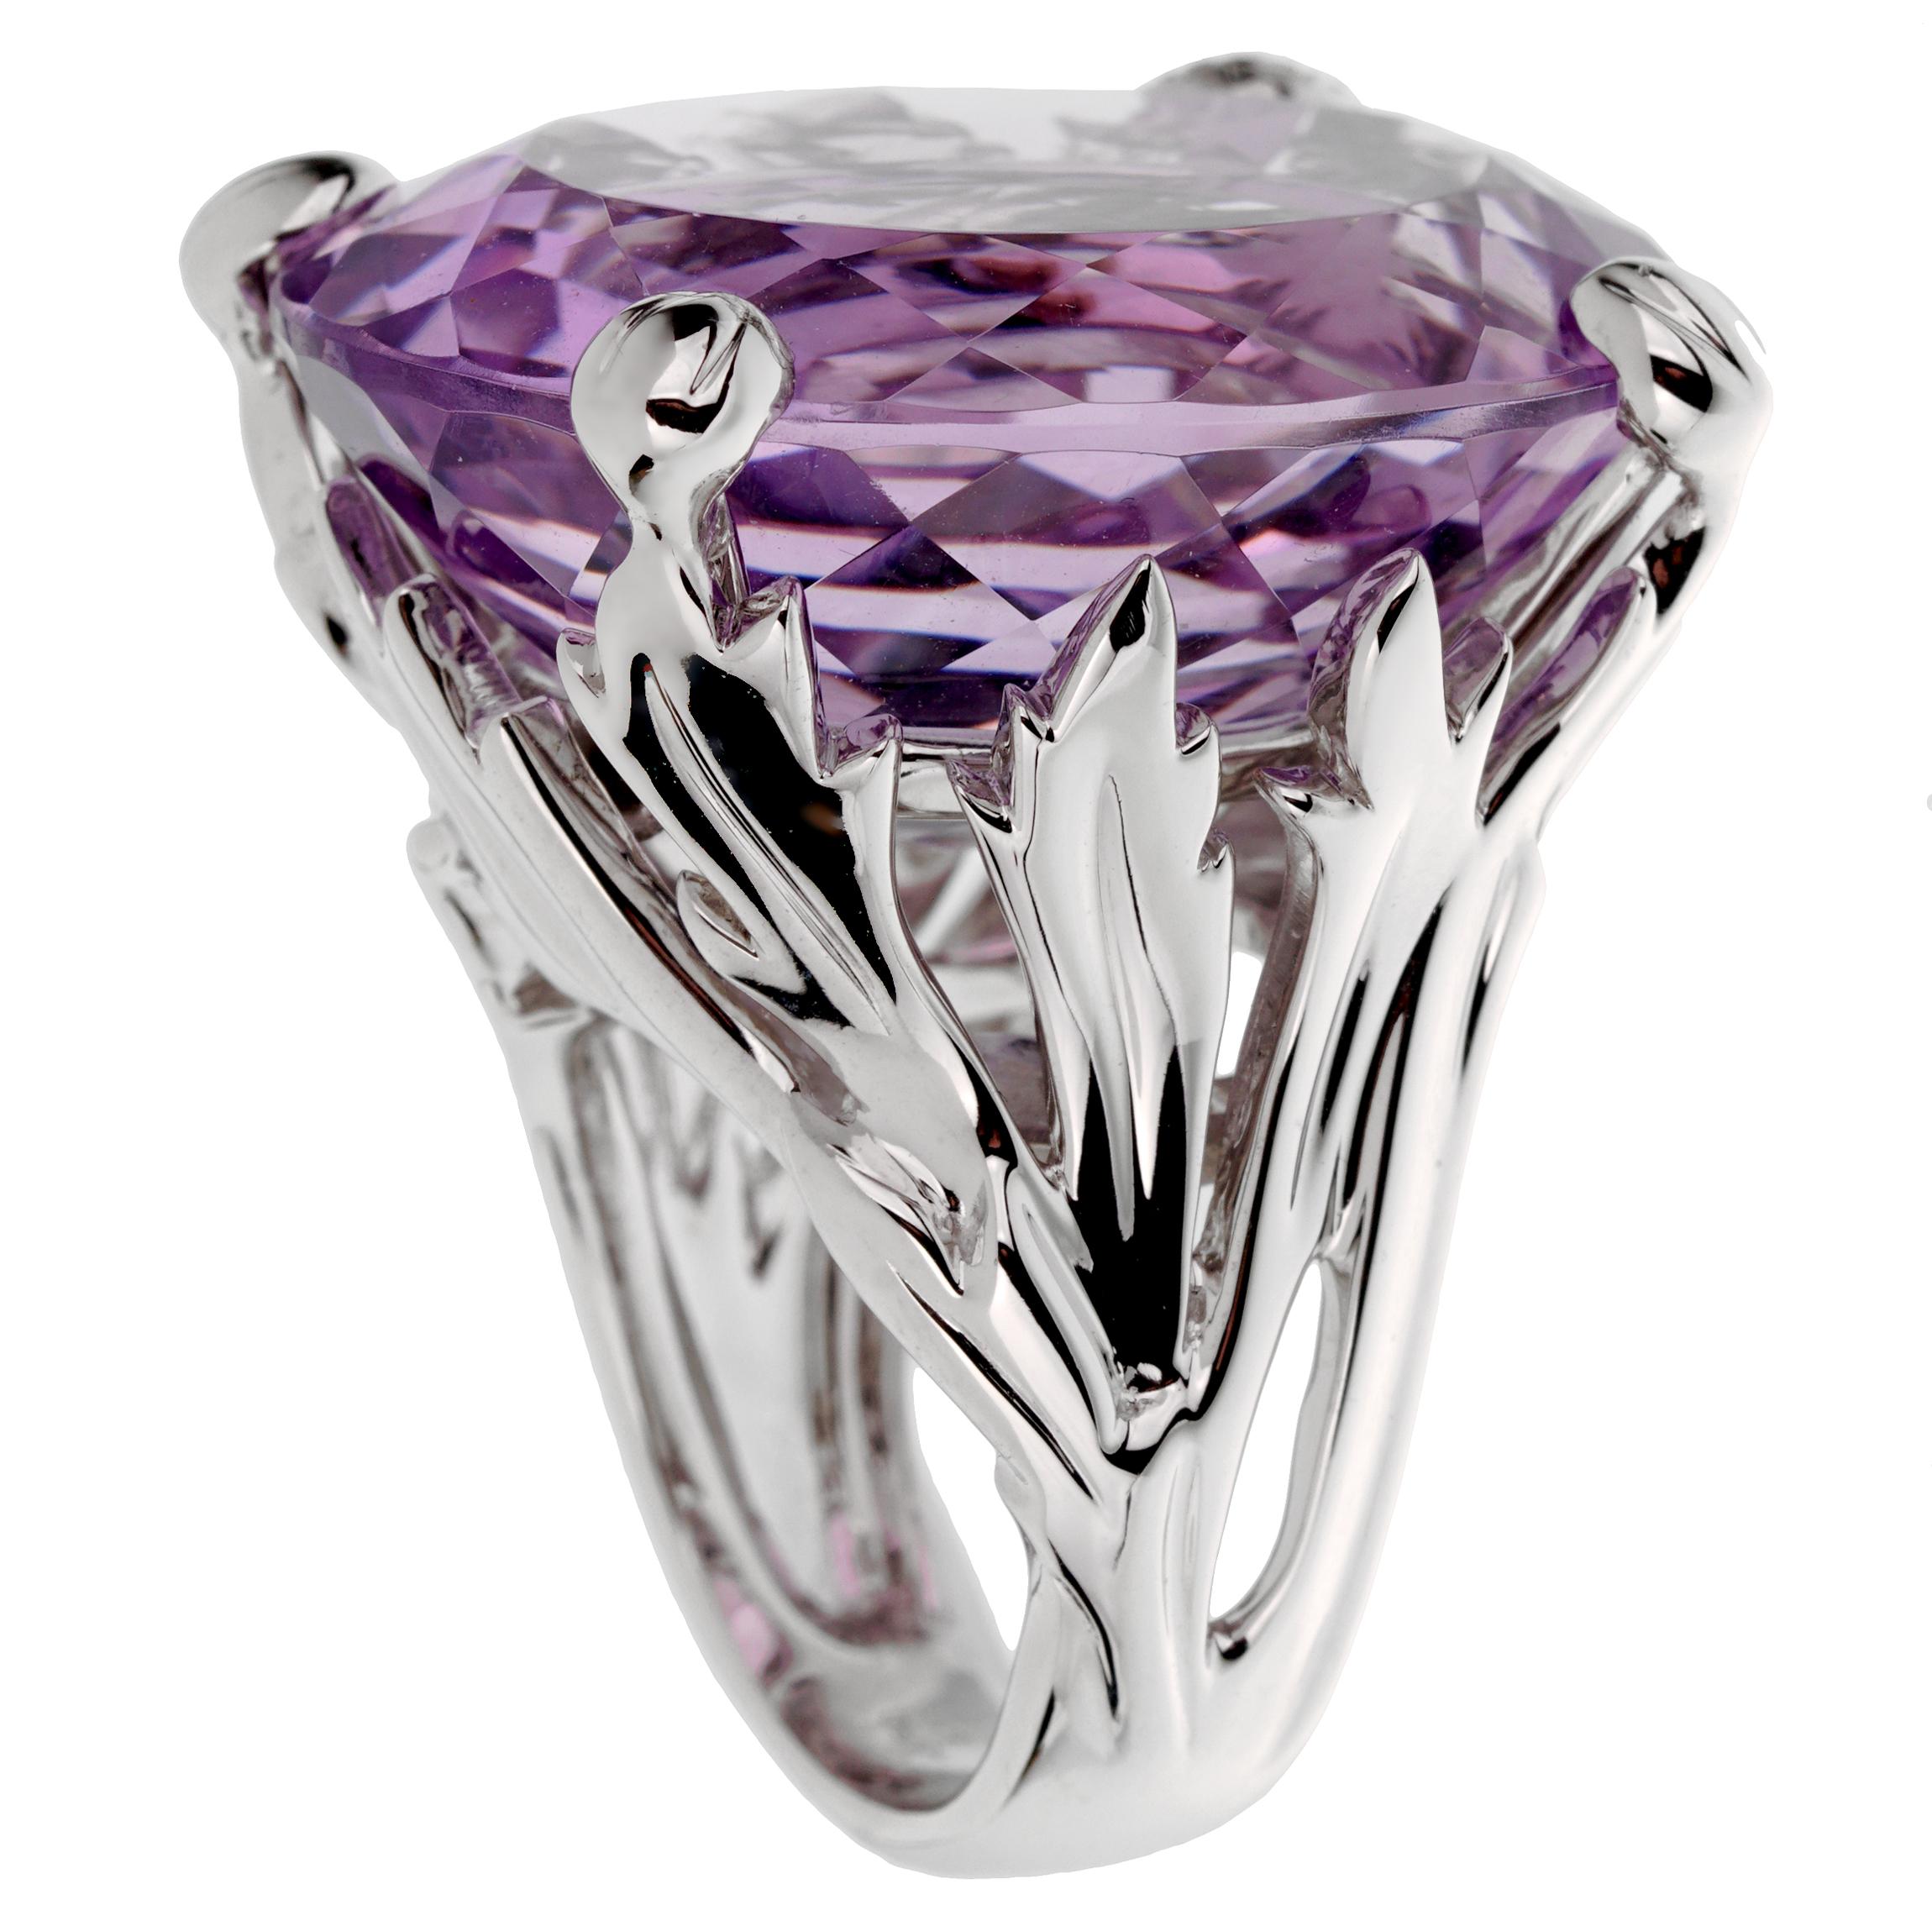 An incredible Christian Dior cocktail ring showcasing a 44.5ct oval amethyst adorned by .12ct of the finest round brilliant cut diamonds in 18k white gold. Euro Size 53

Sku: 2785